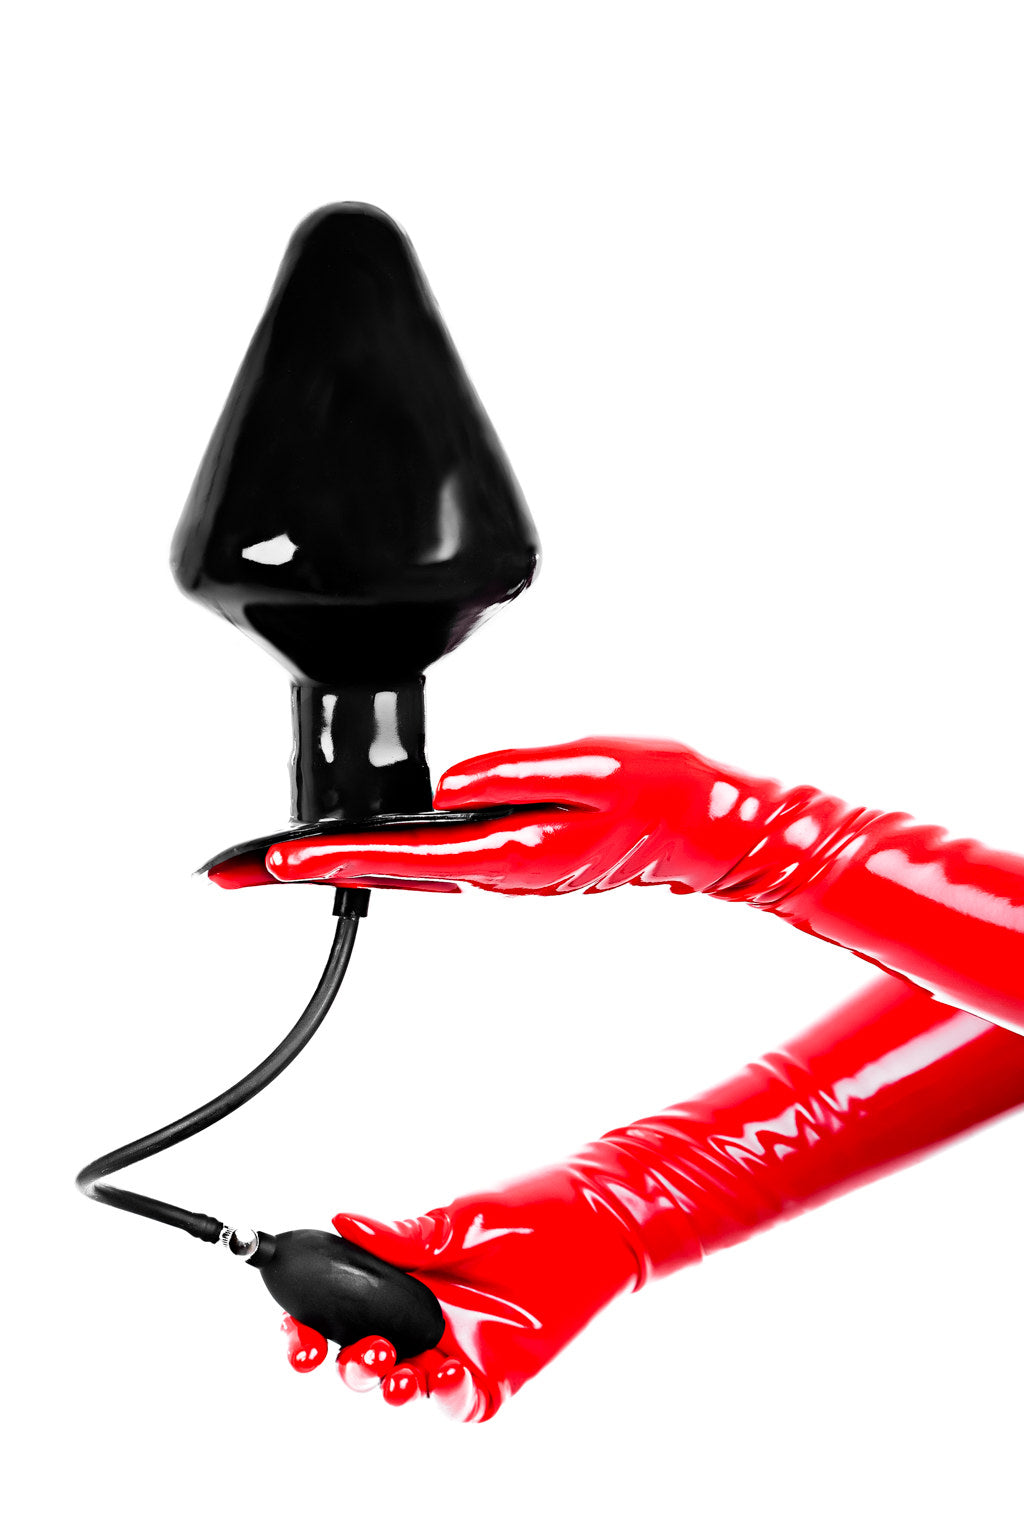 Red latex gloves holding an extra large inflatable gargantuan butt plug.